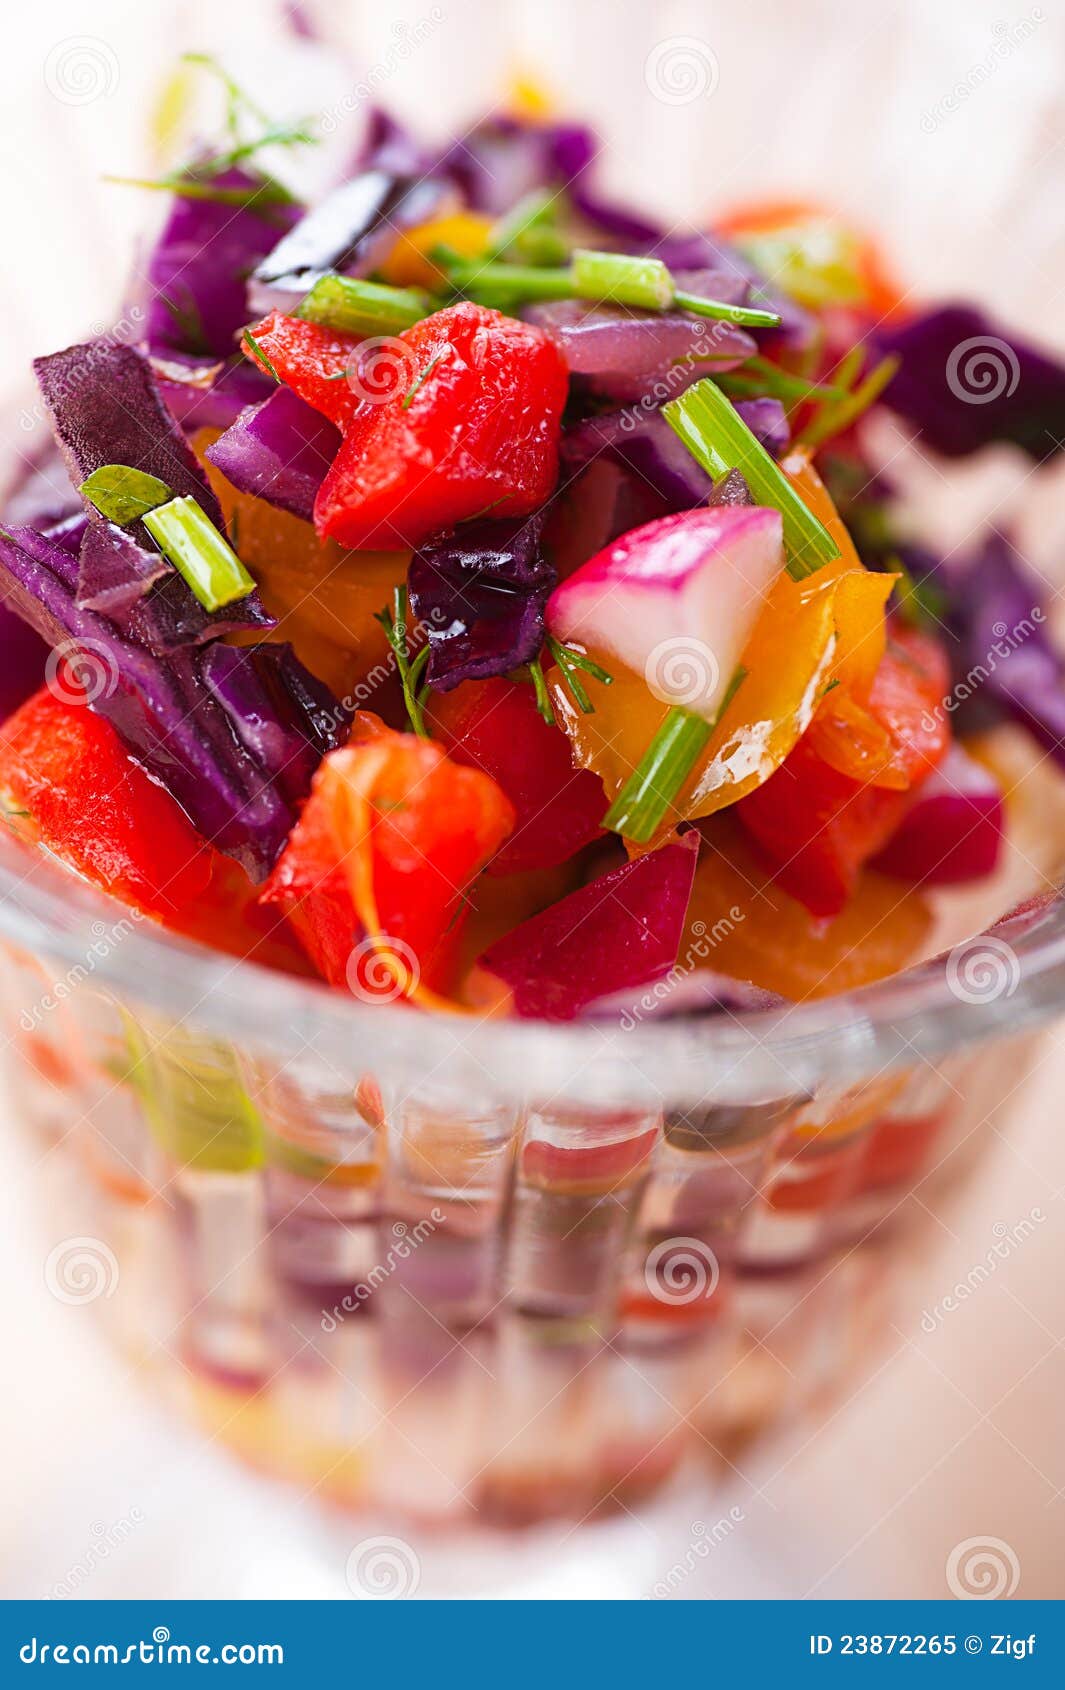 Russian salad stock image. Image of cucumber, meal, fork - 23872265